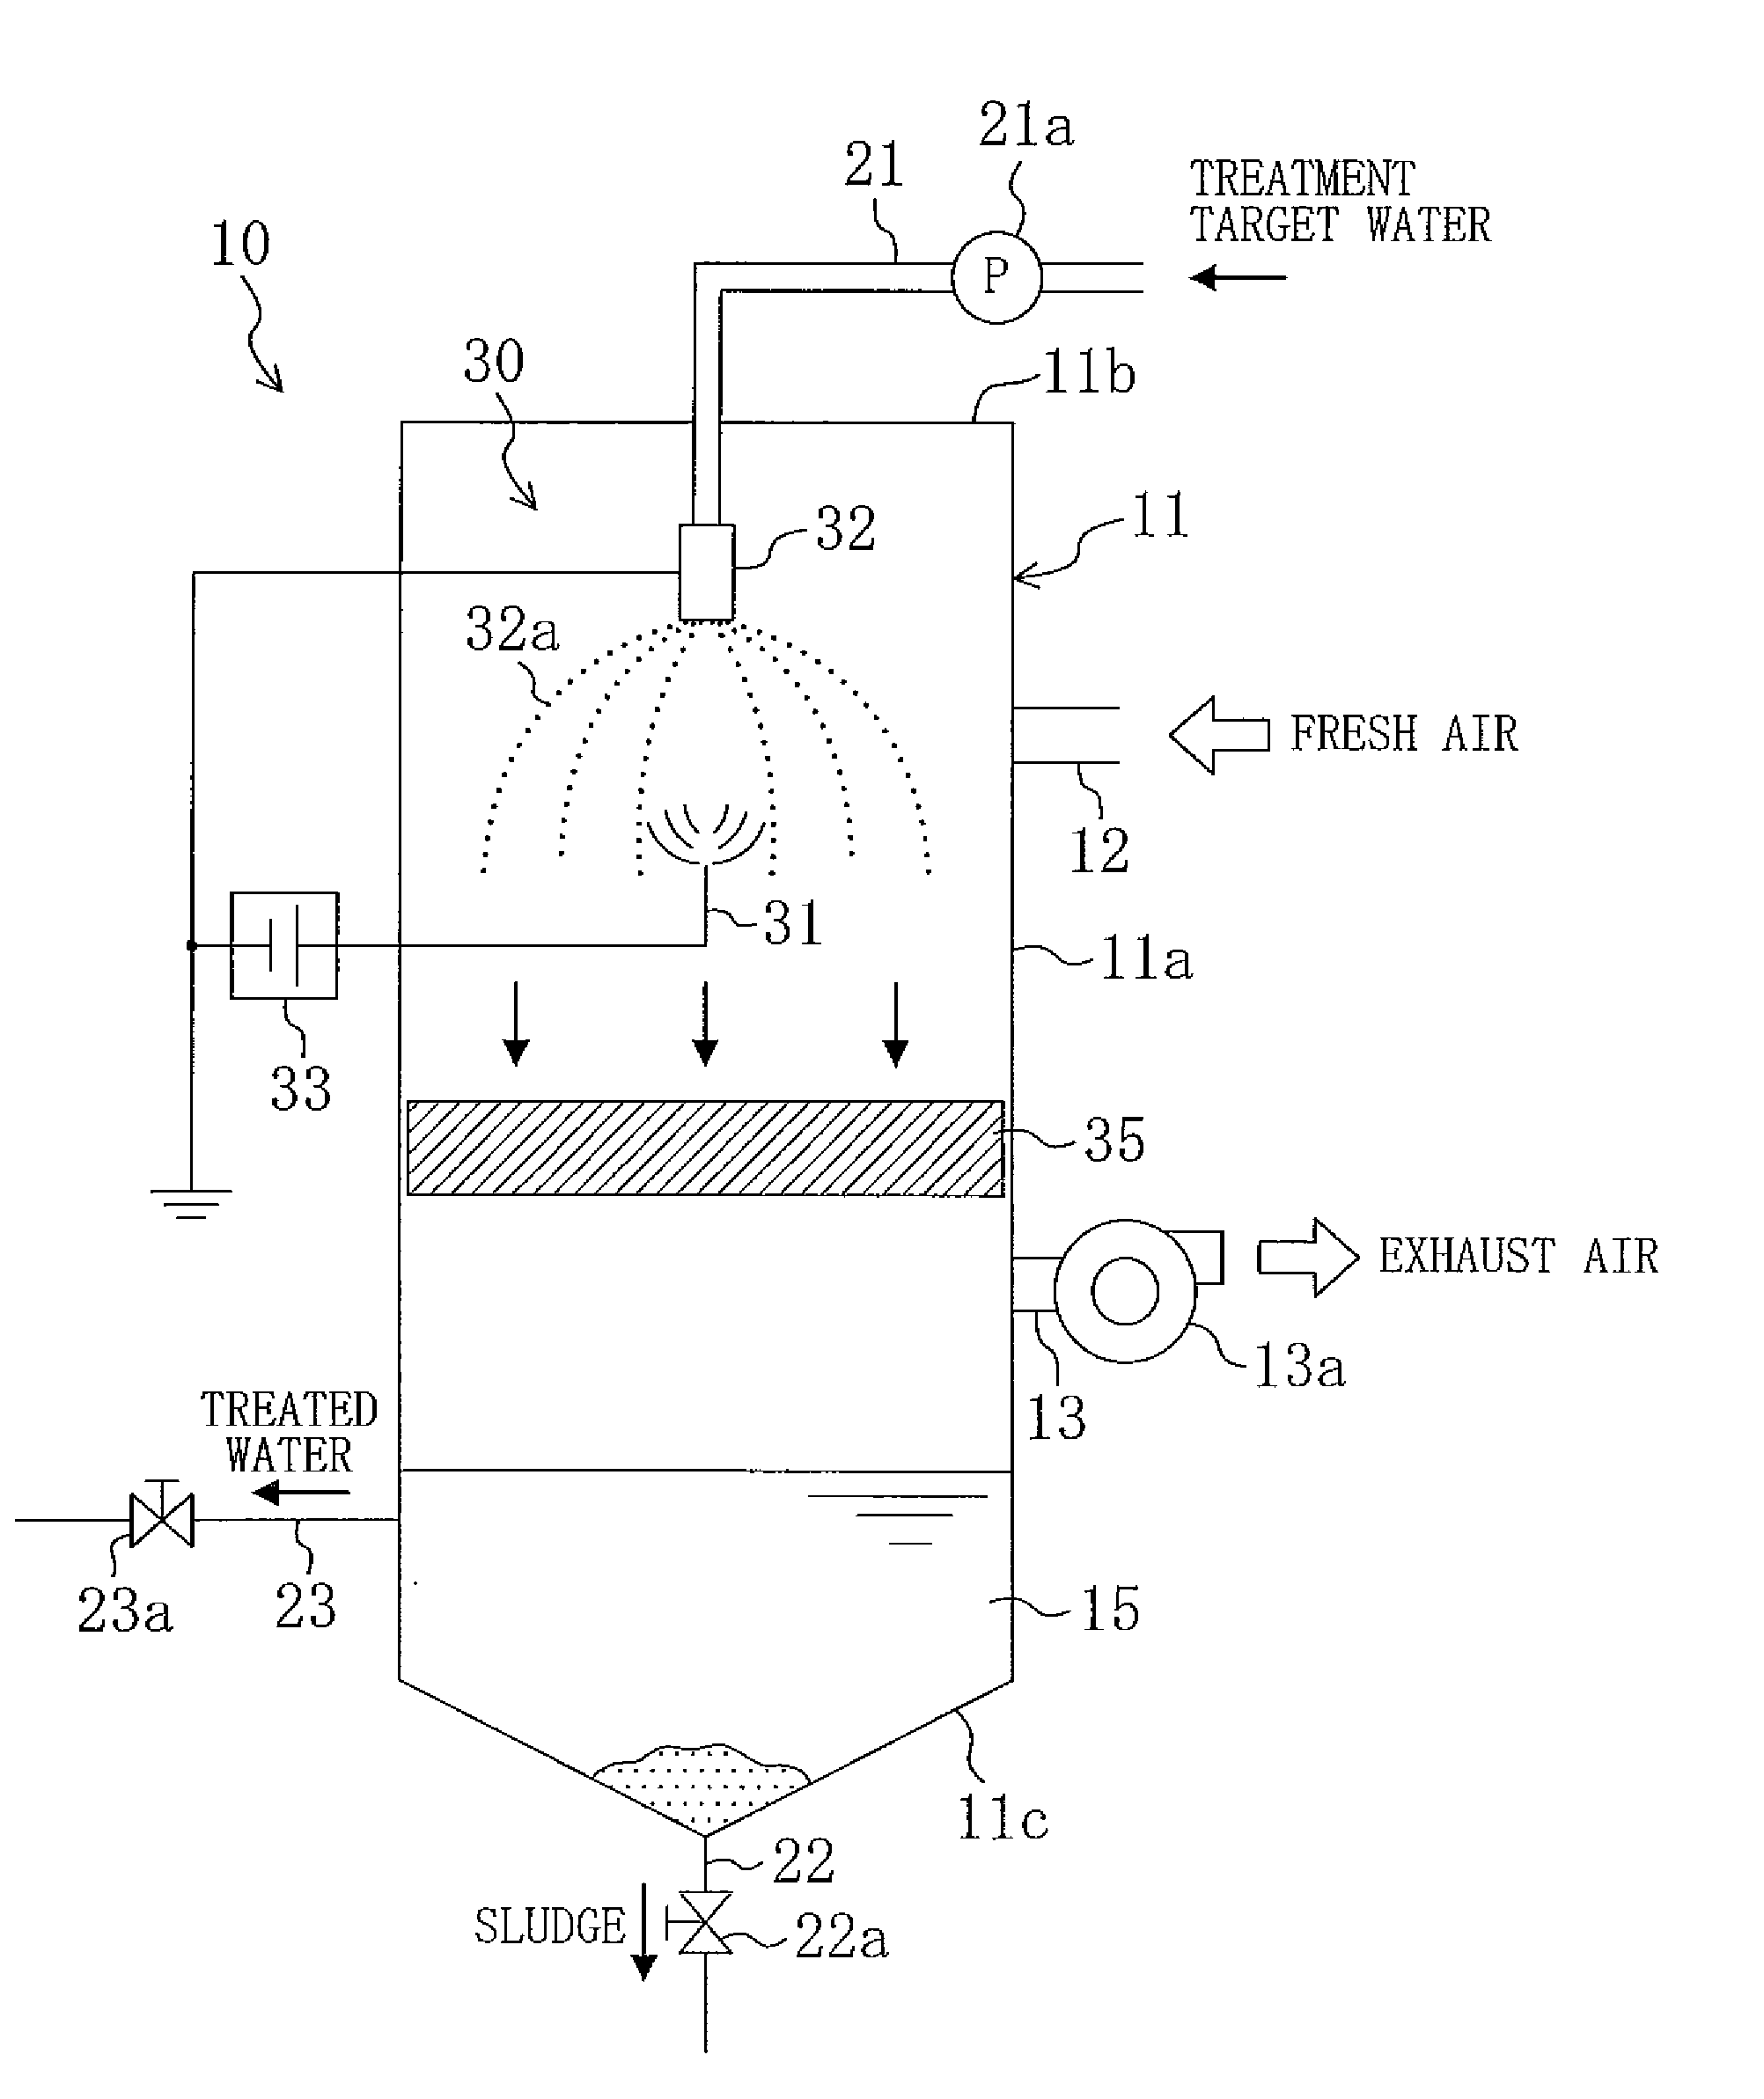 Liquid treatment apparatus, air conditioning system, and humidifier